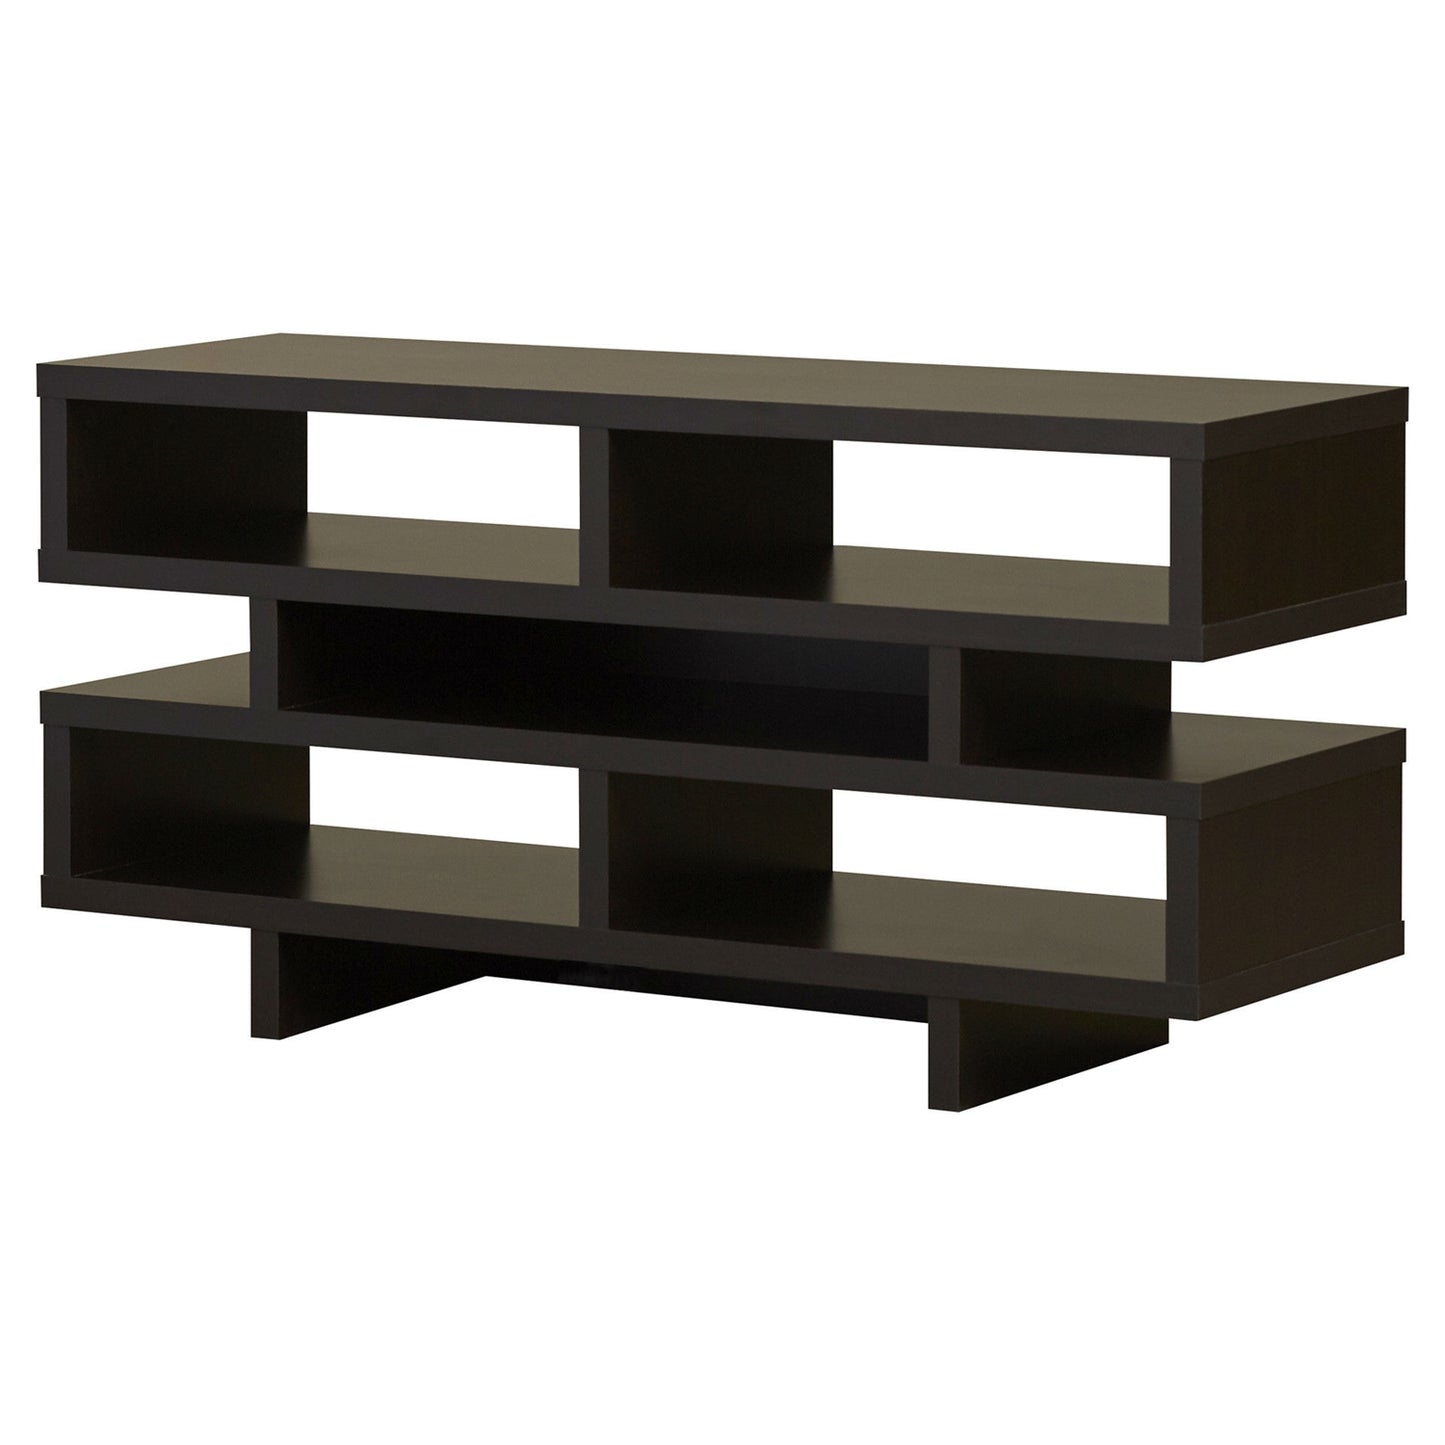 Modern TV Stand Entertainment Center in Dark Brown Cappuccino Wood Finish